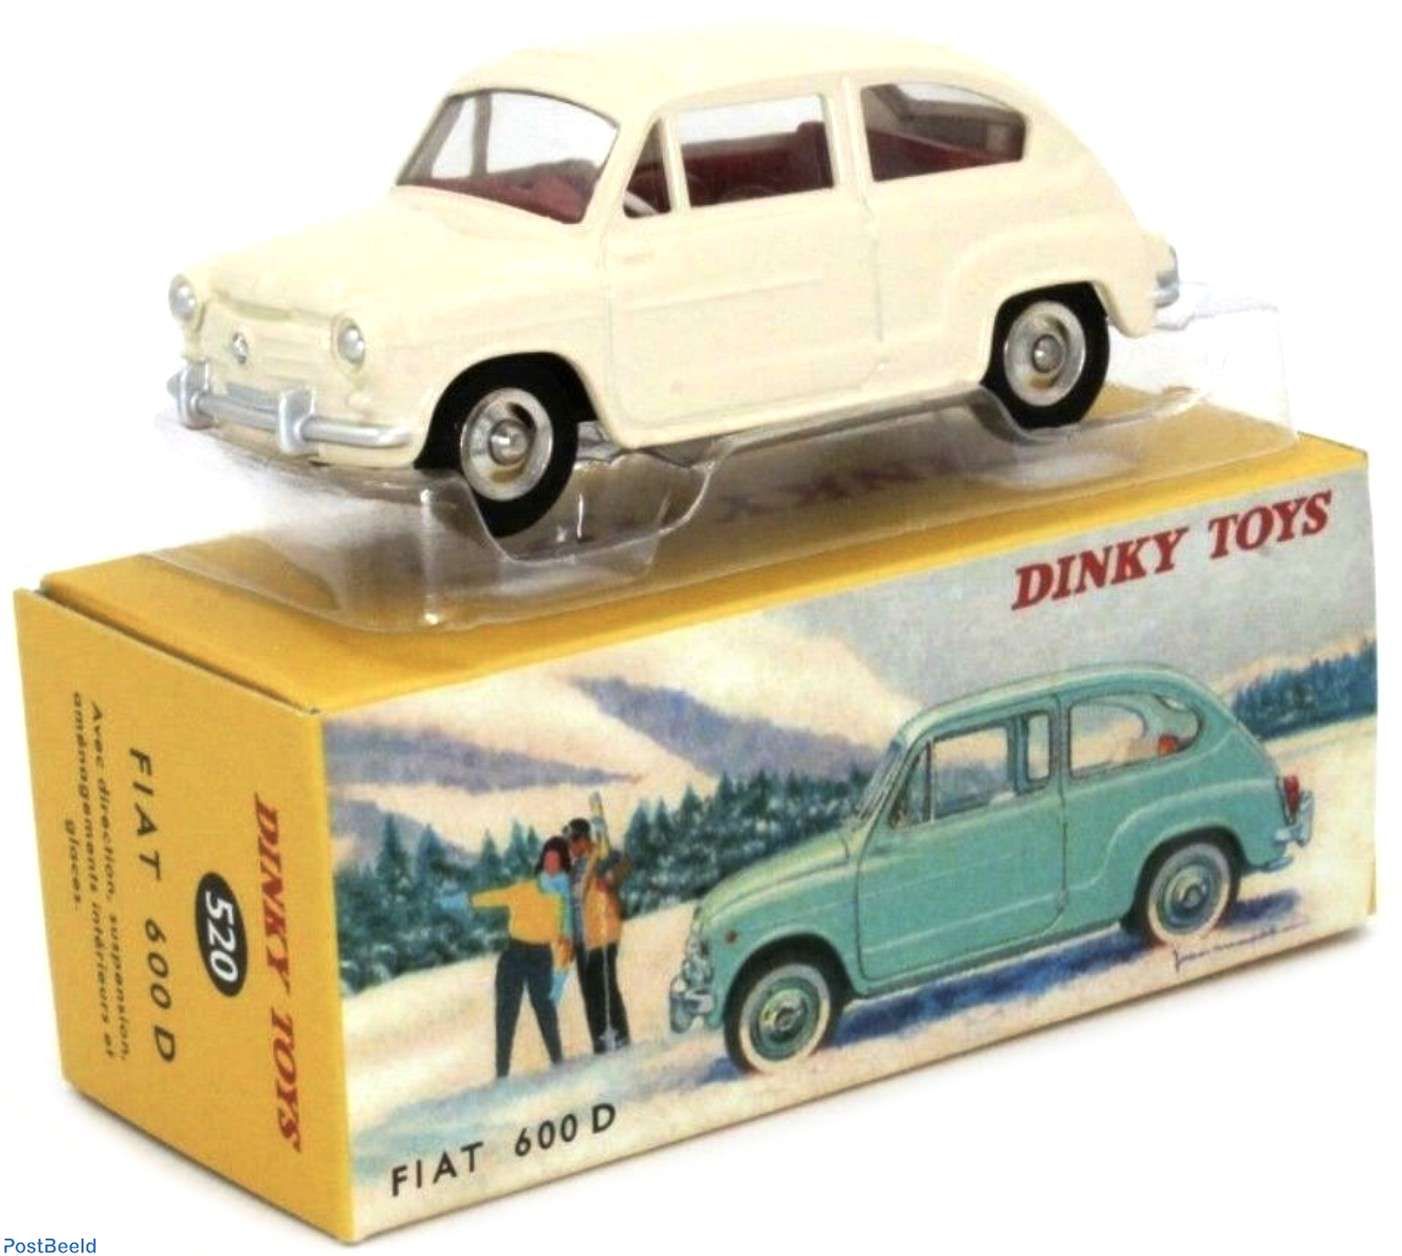 Fiat 600D, Dinky Toys Replica - Collecting Stamps - PostBeeld - Online  Stamp Shop - Collecting